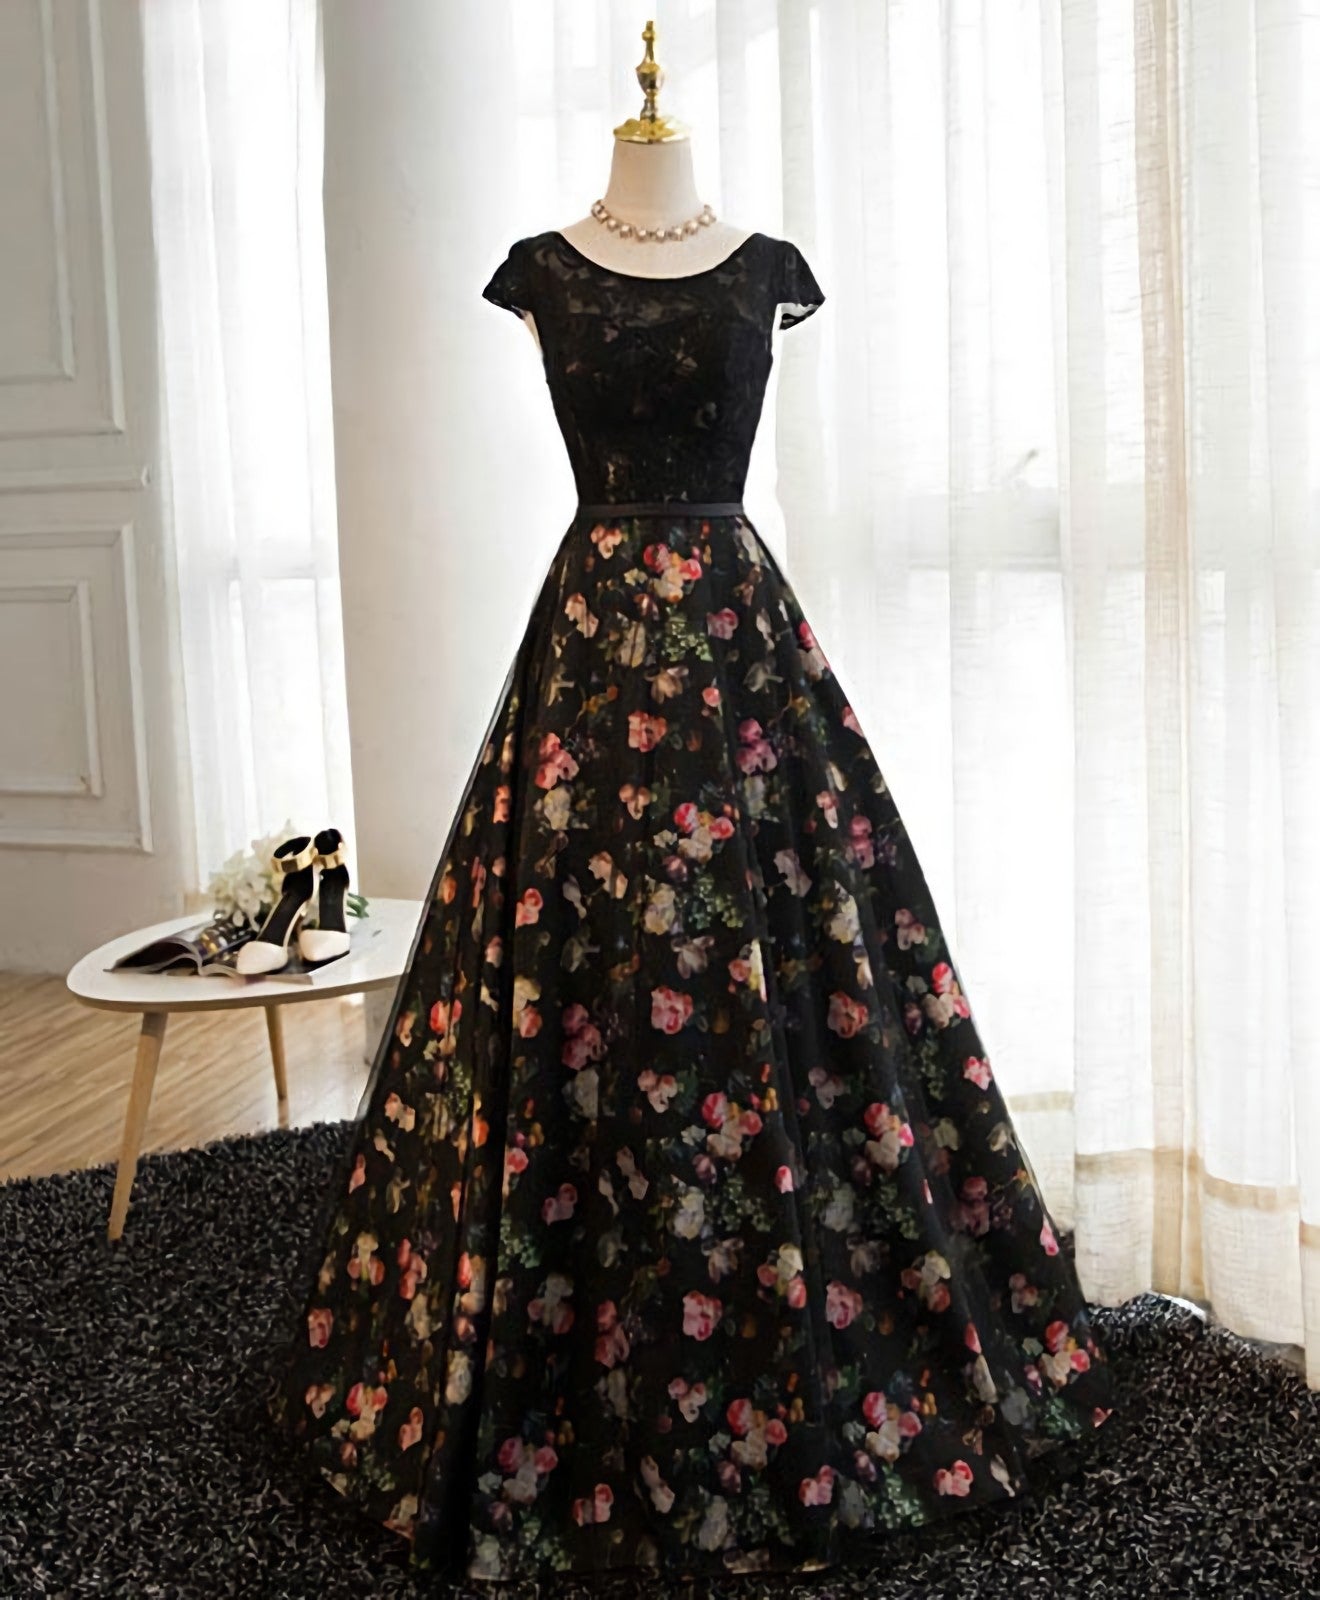 Black Lace Floral Patterns Long Corset Prom Dress, Black Evening Dress outfit, Homecoming Dress Simple